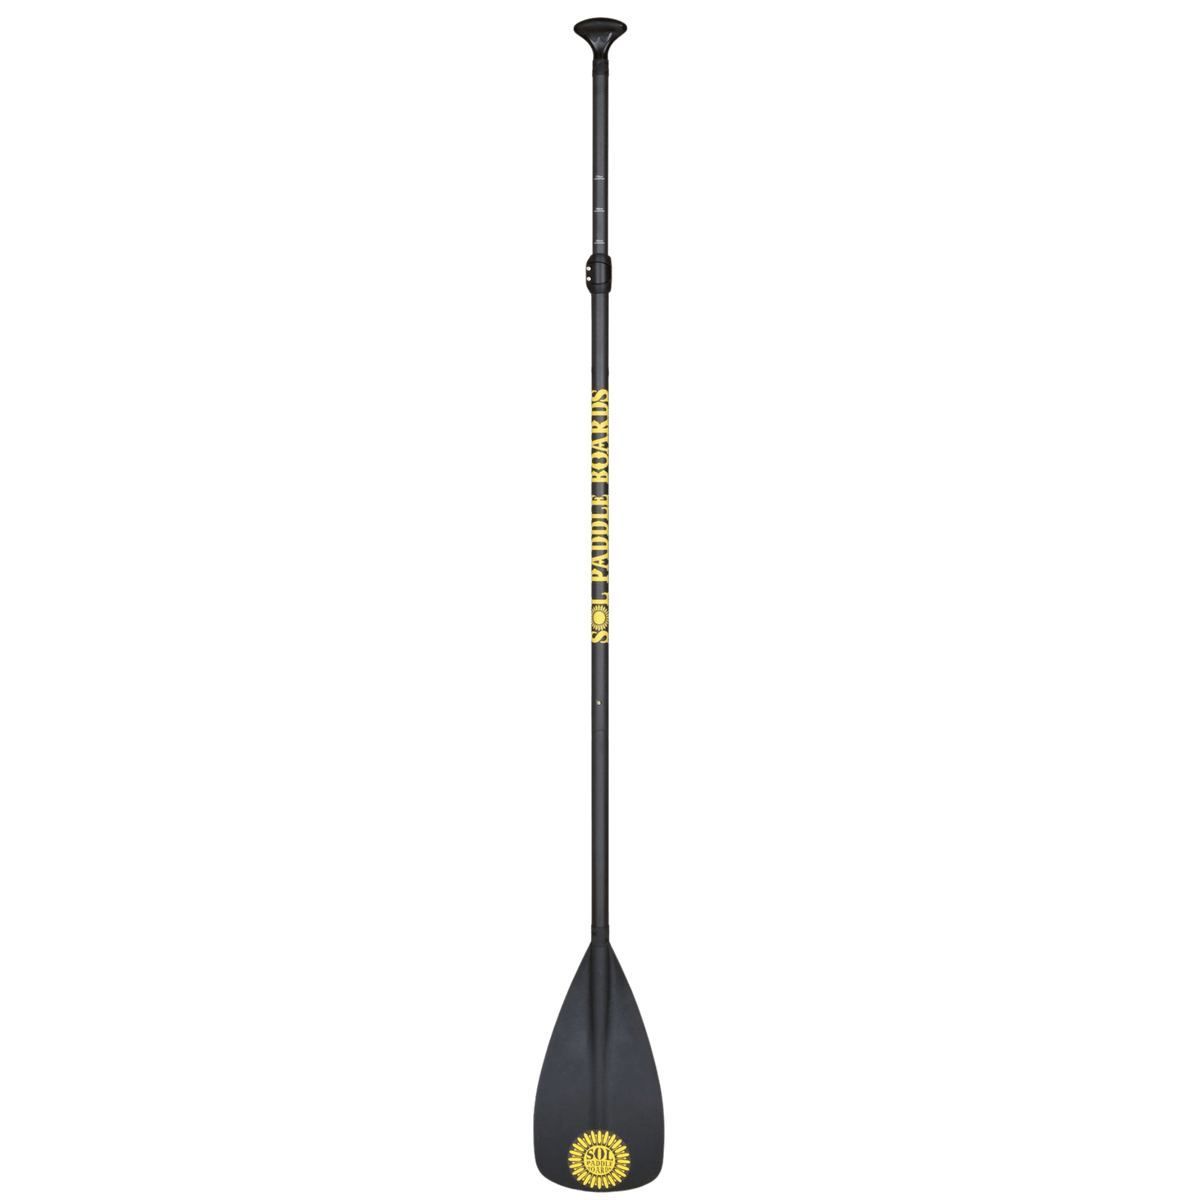 SOL Carbon Blaster Three-Piece Travel Paddle | SOL Paddle Boards